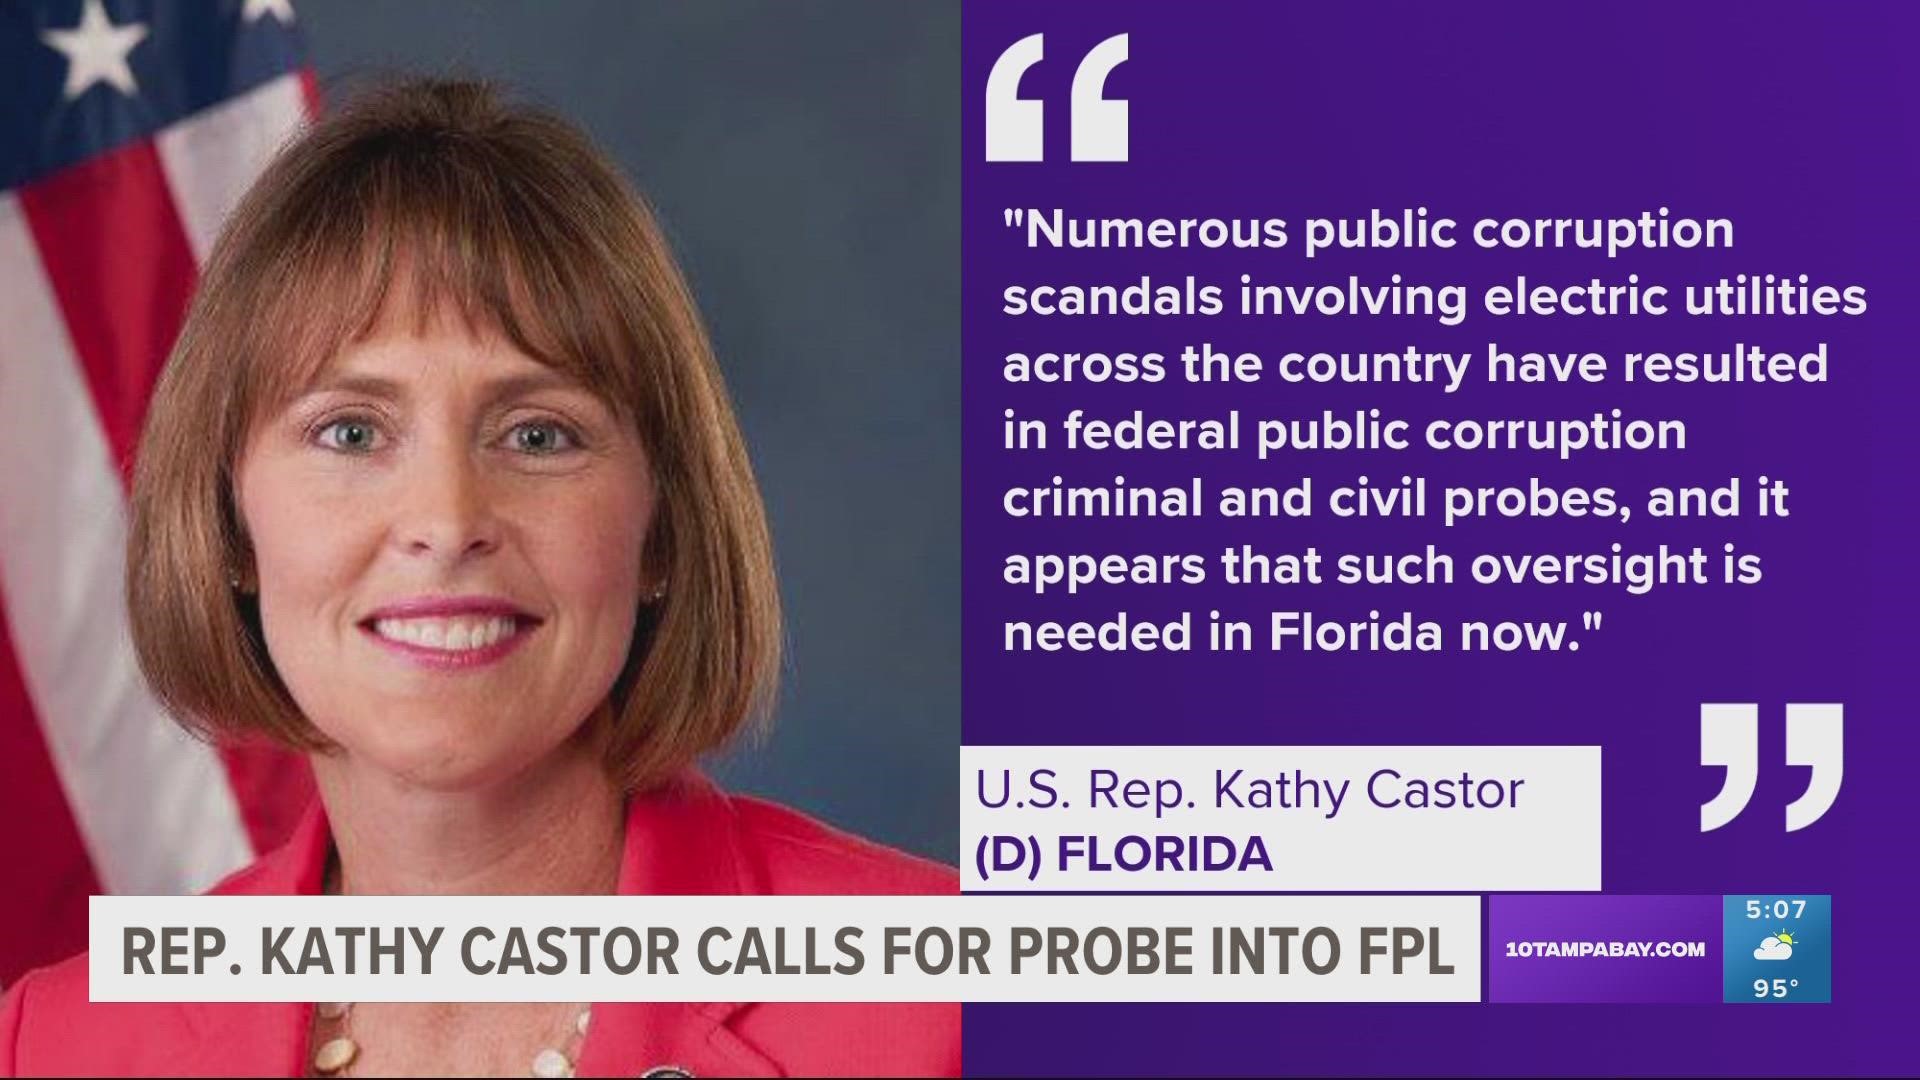 The congresswoman wrote that recent reports in Florida had "exposed apparent corruption."